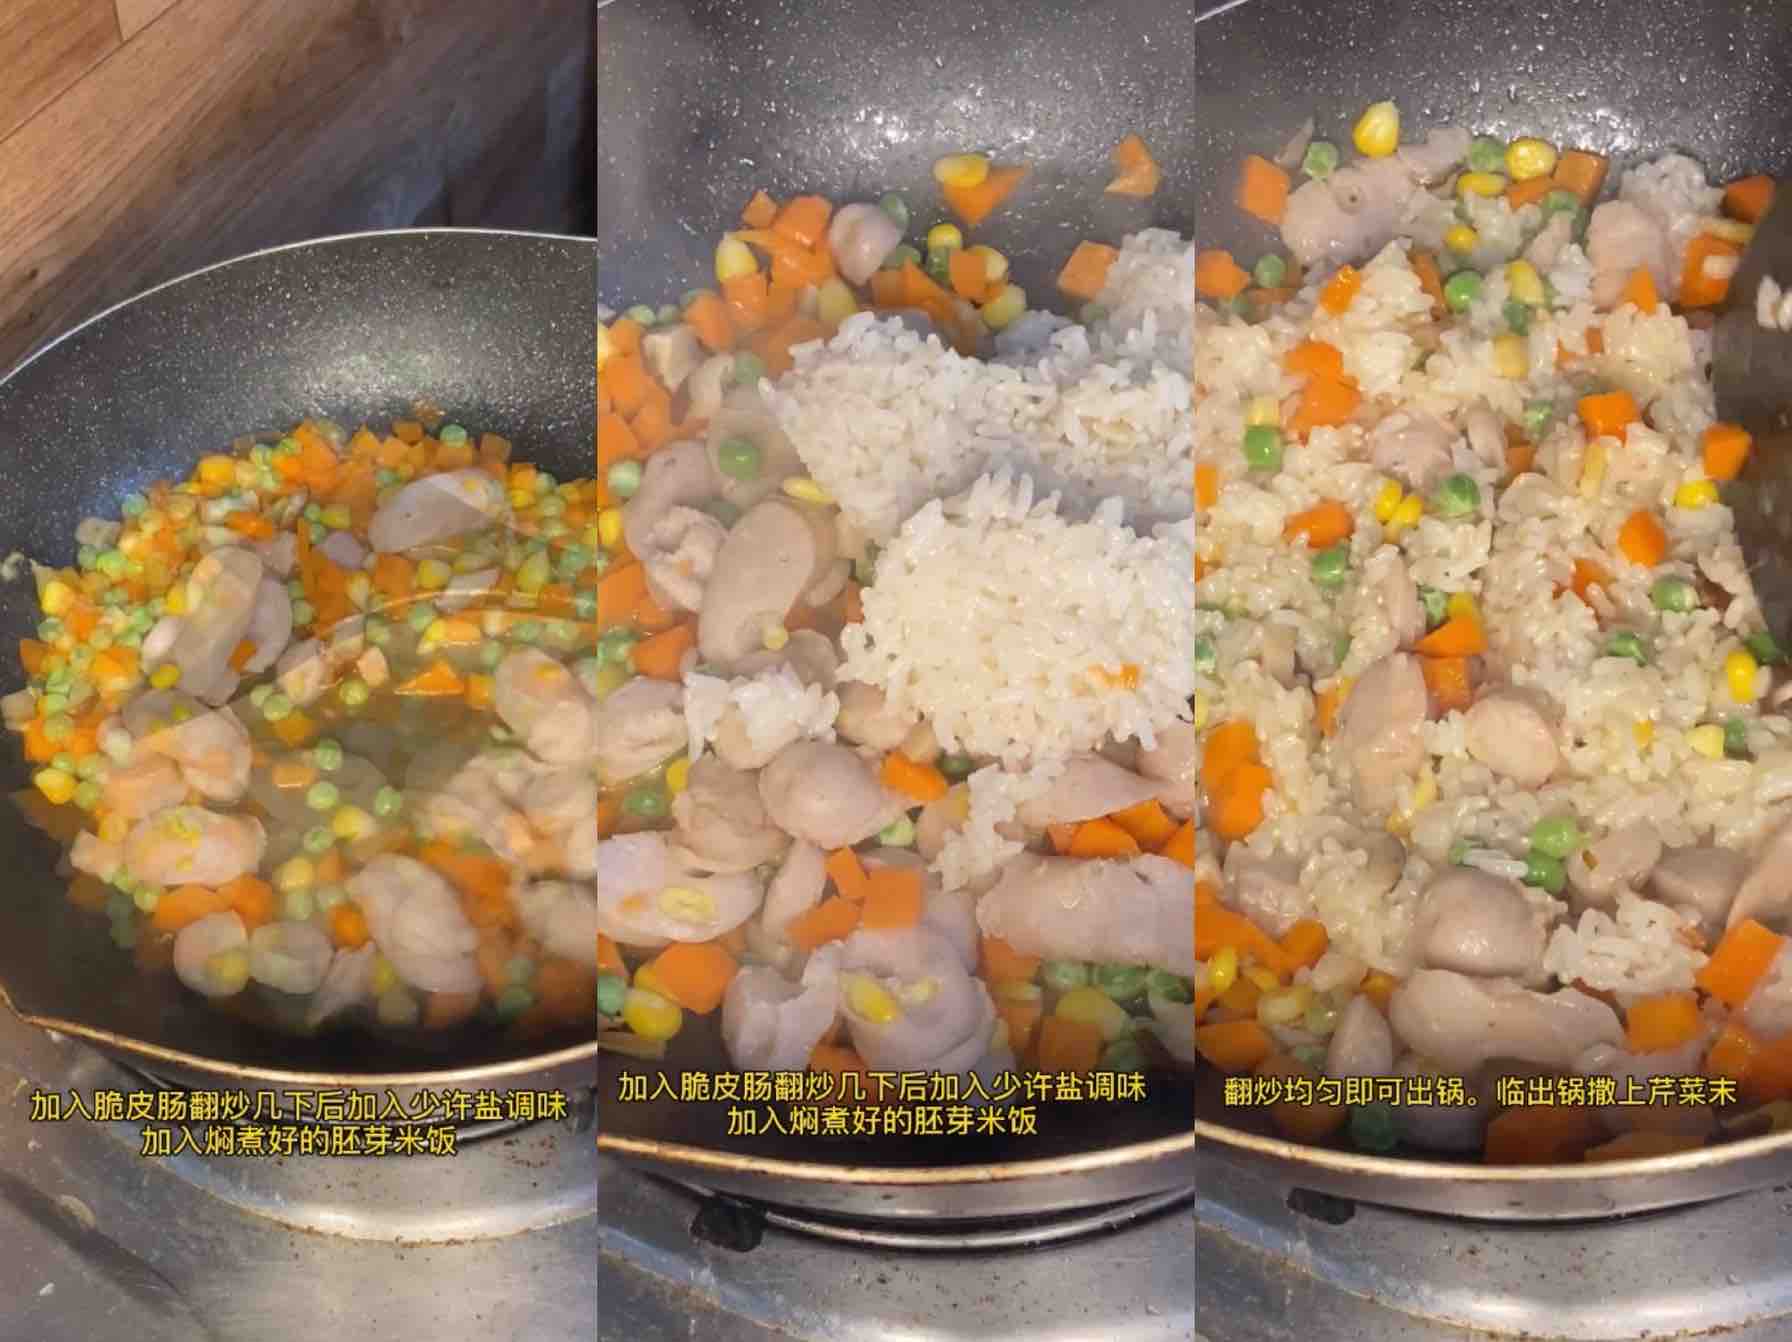 Let The Rice Residues Become Dry Rice People-colorful and Colorful Fried Rice recipe